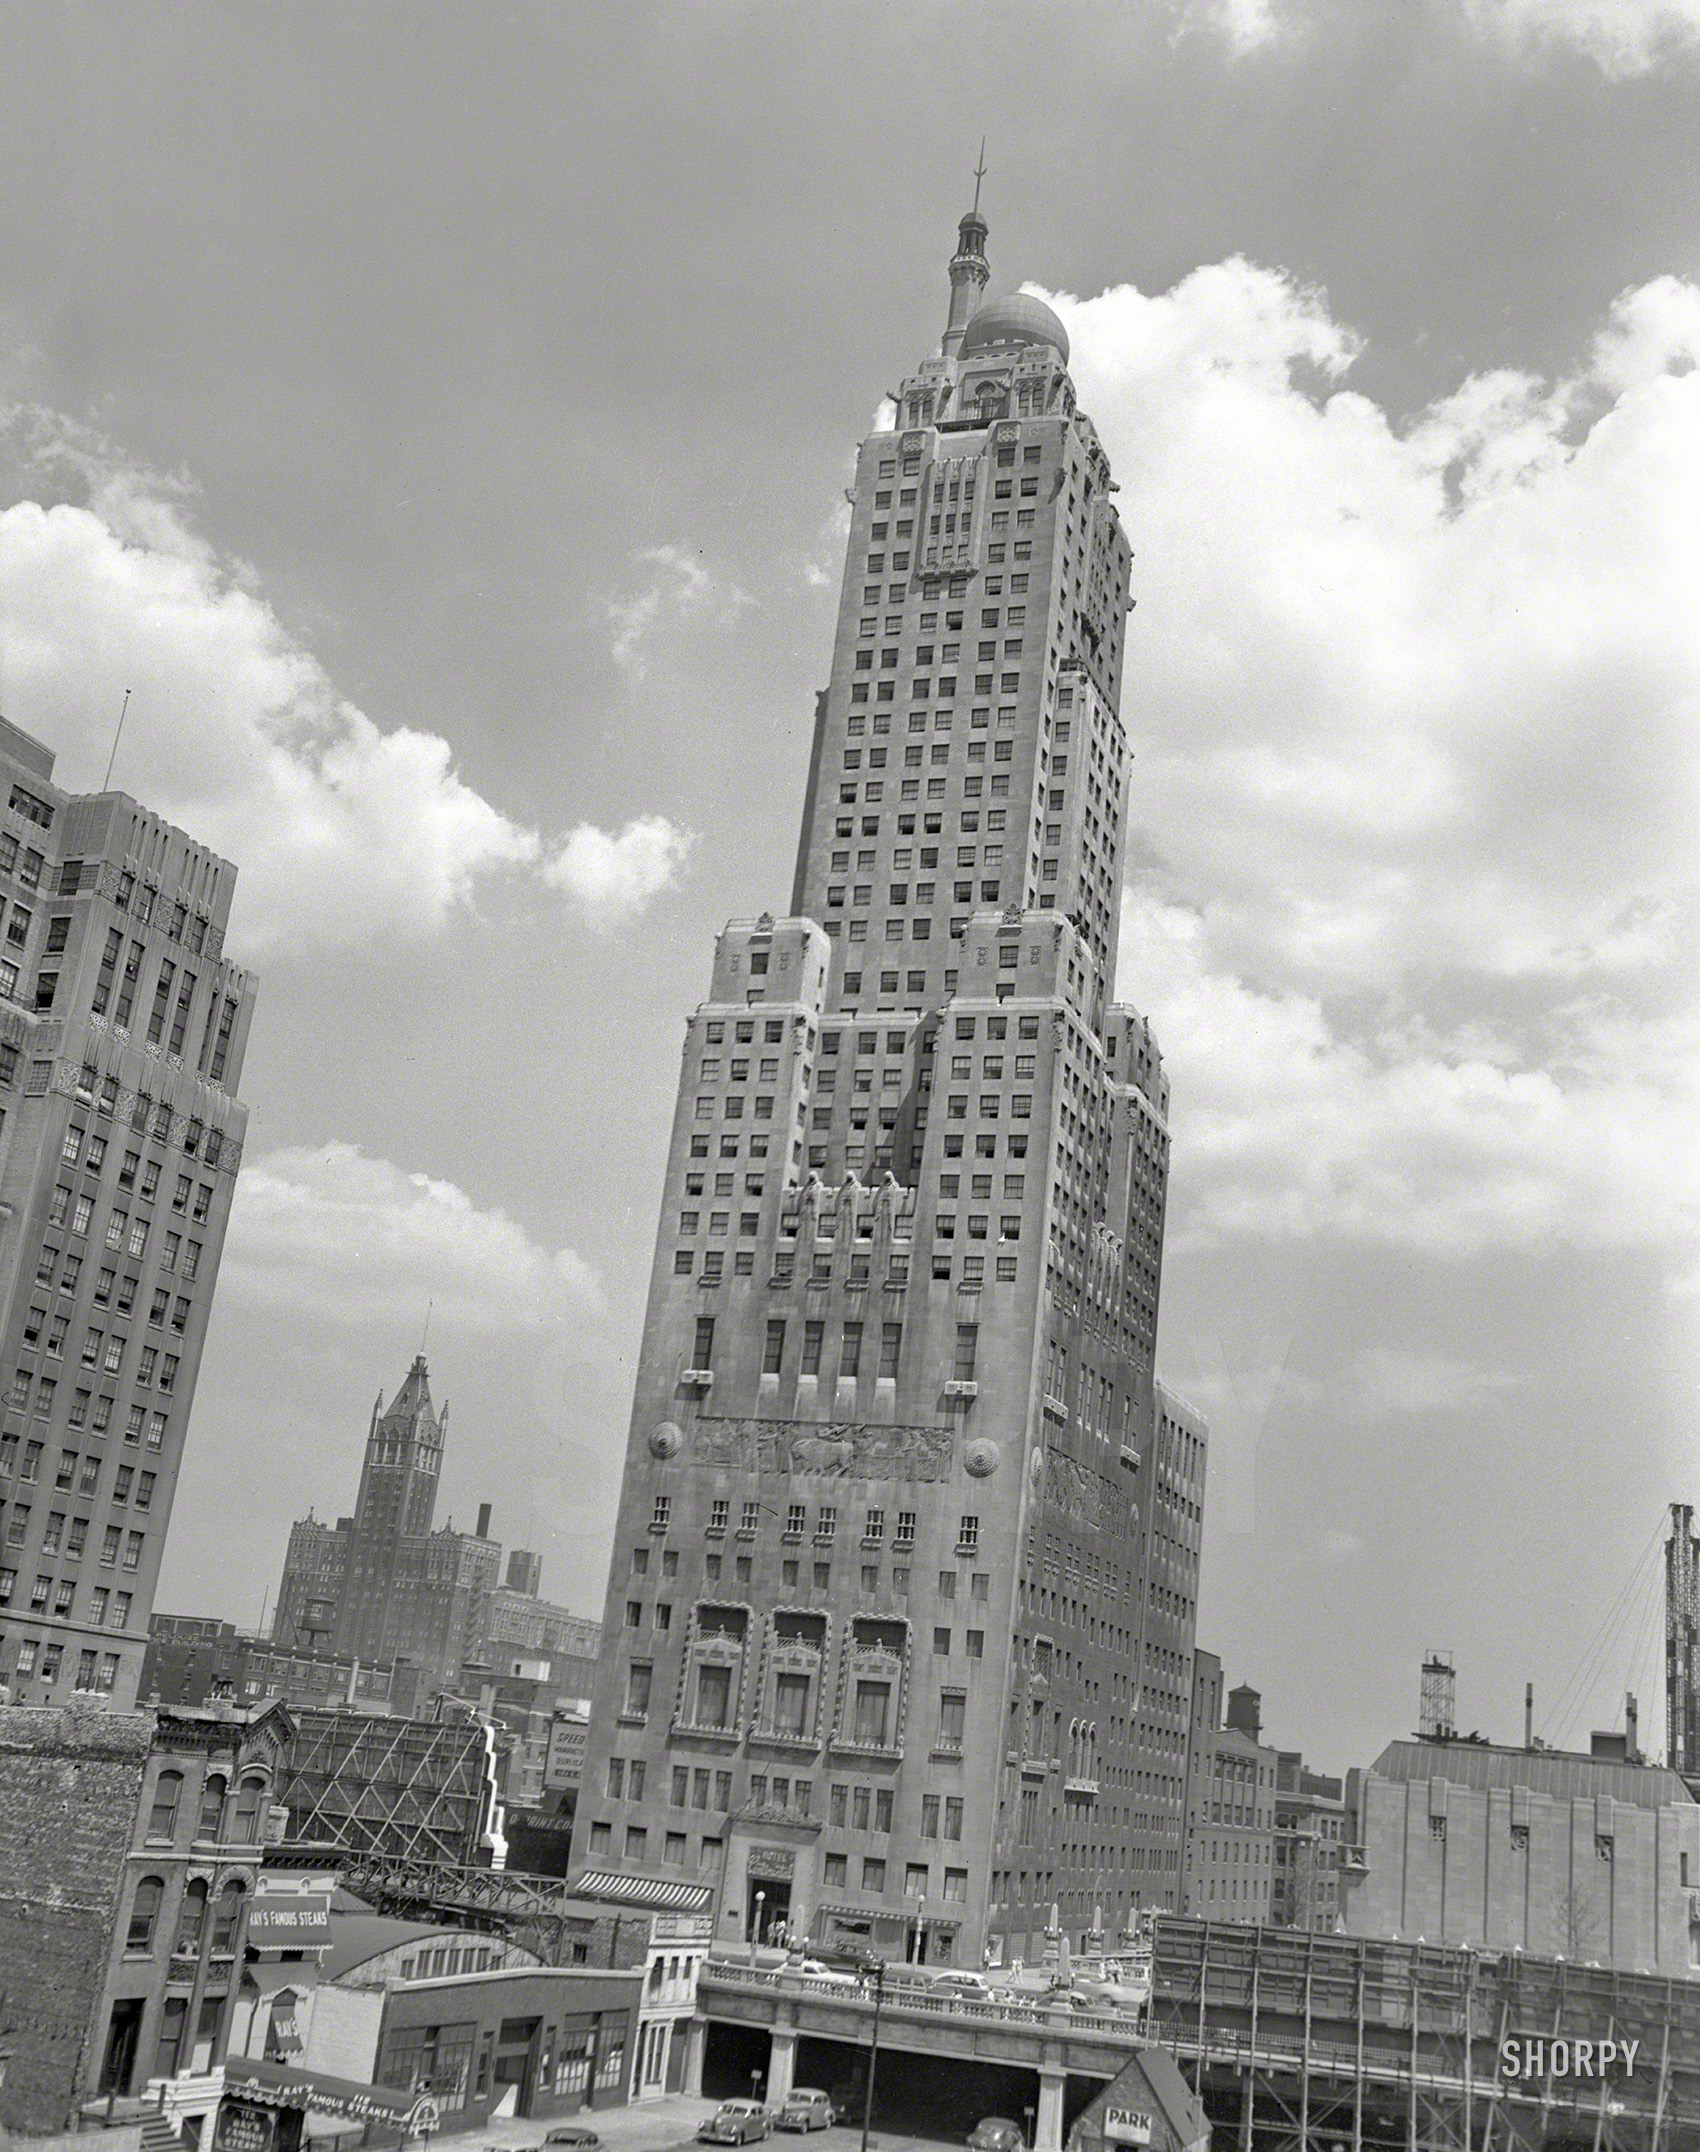 August 6, 1947. "Continental Hotel, Chicago." 45-story tower completed in 1929; the onion dome encloses a spiral staircase leading to a small observatory. 4x5 acetate negative from the News Archive. View full size.